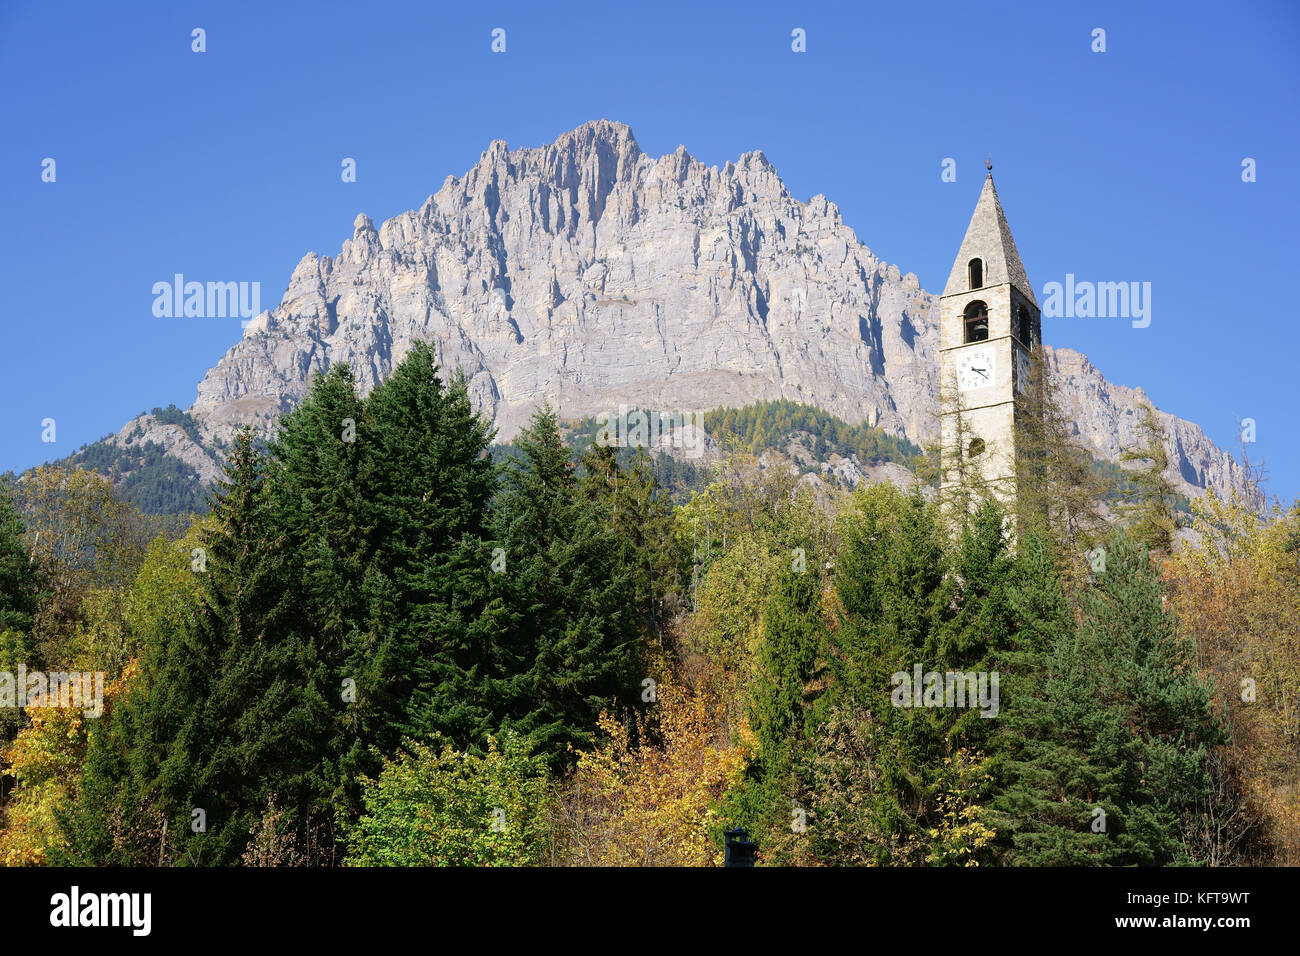 Bell tower with fall colors in the foreground and a massive cliff (Monte Bersaio) for backdrop. Sambuco, Province of Cuneo, Piedmont, Italy. Stock Photo